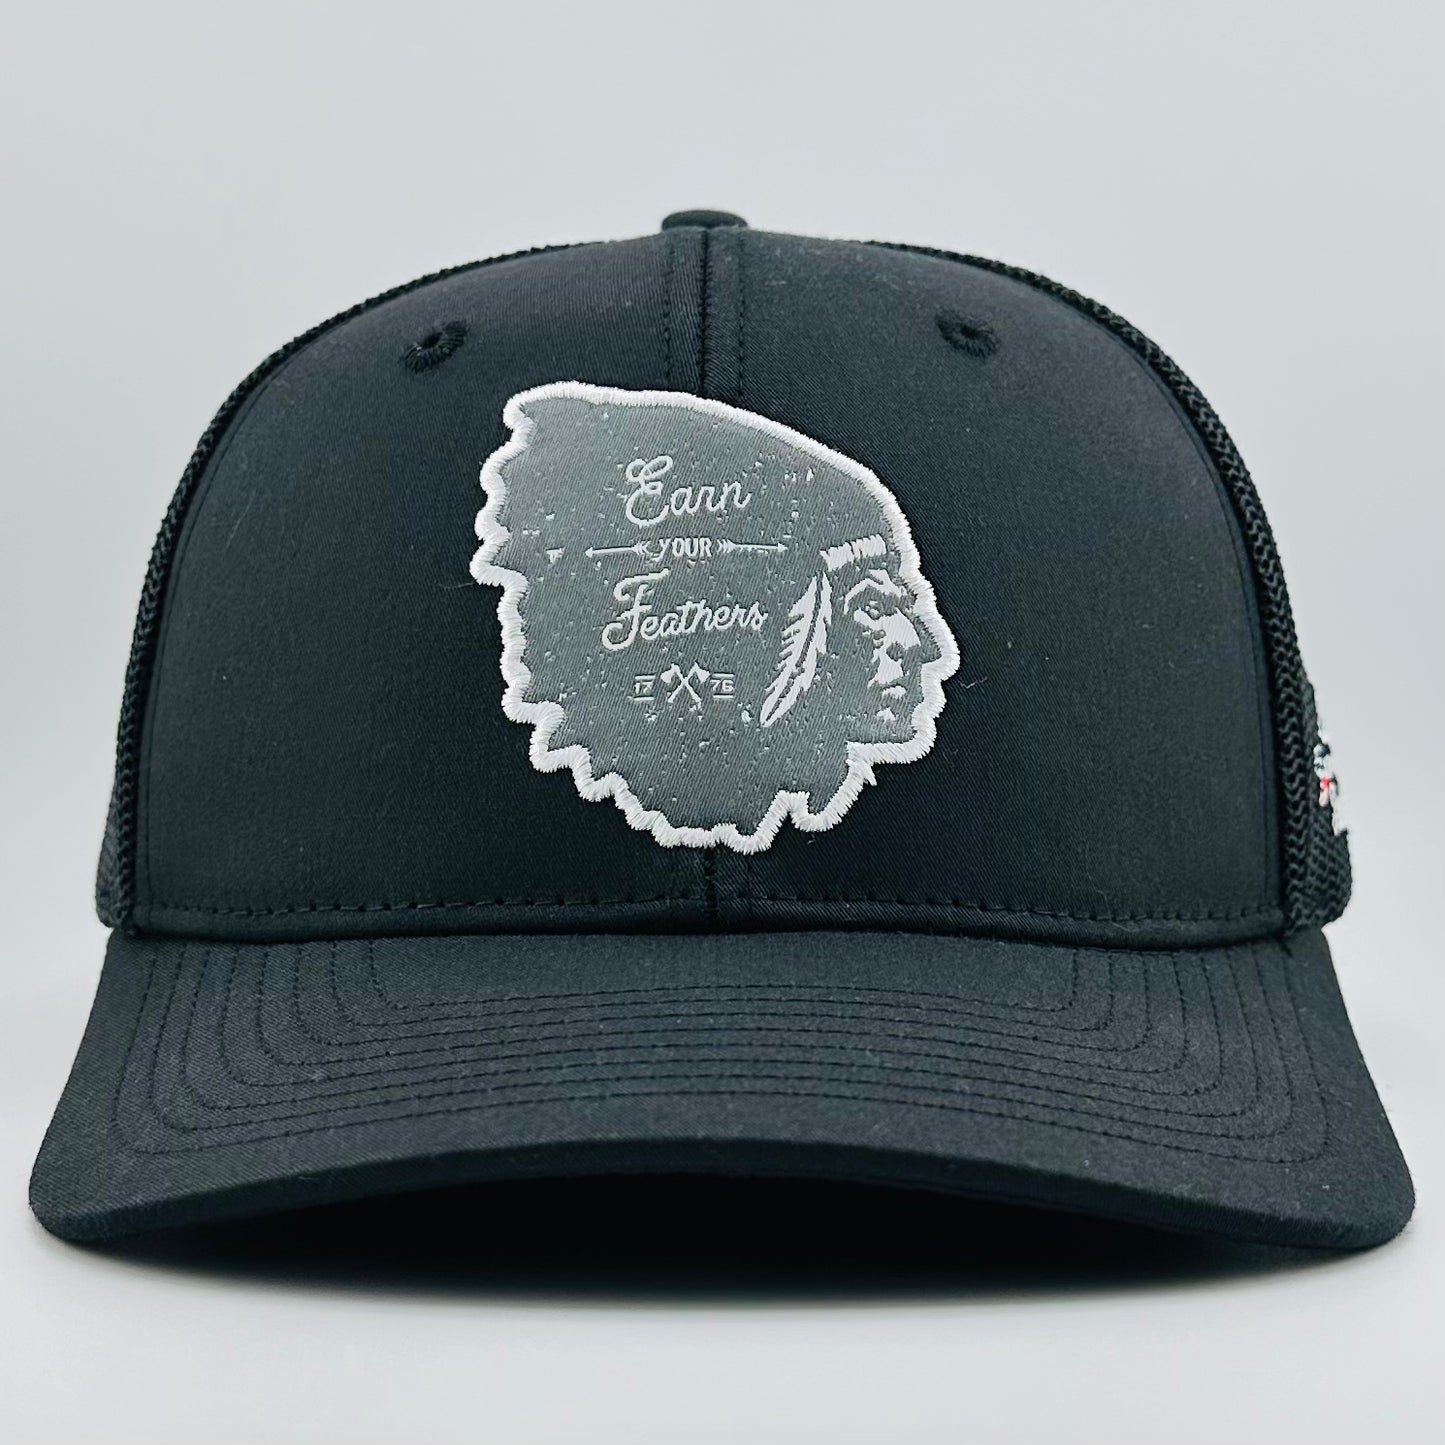 "Earn Your Feathers" - Cowboy Revolution 6-panel Trucker Hat (QTY 12)